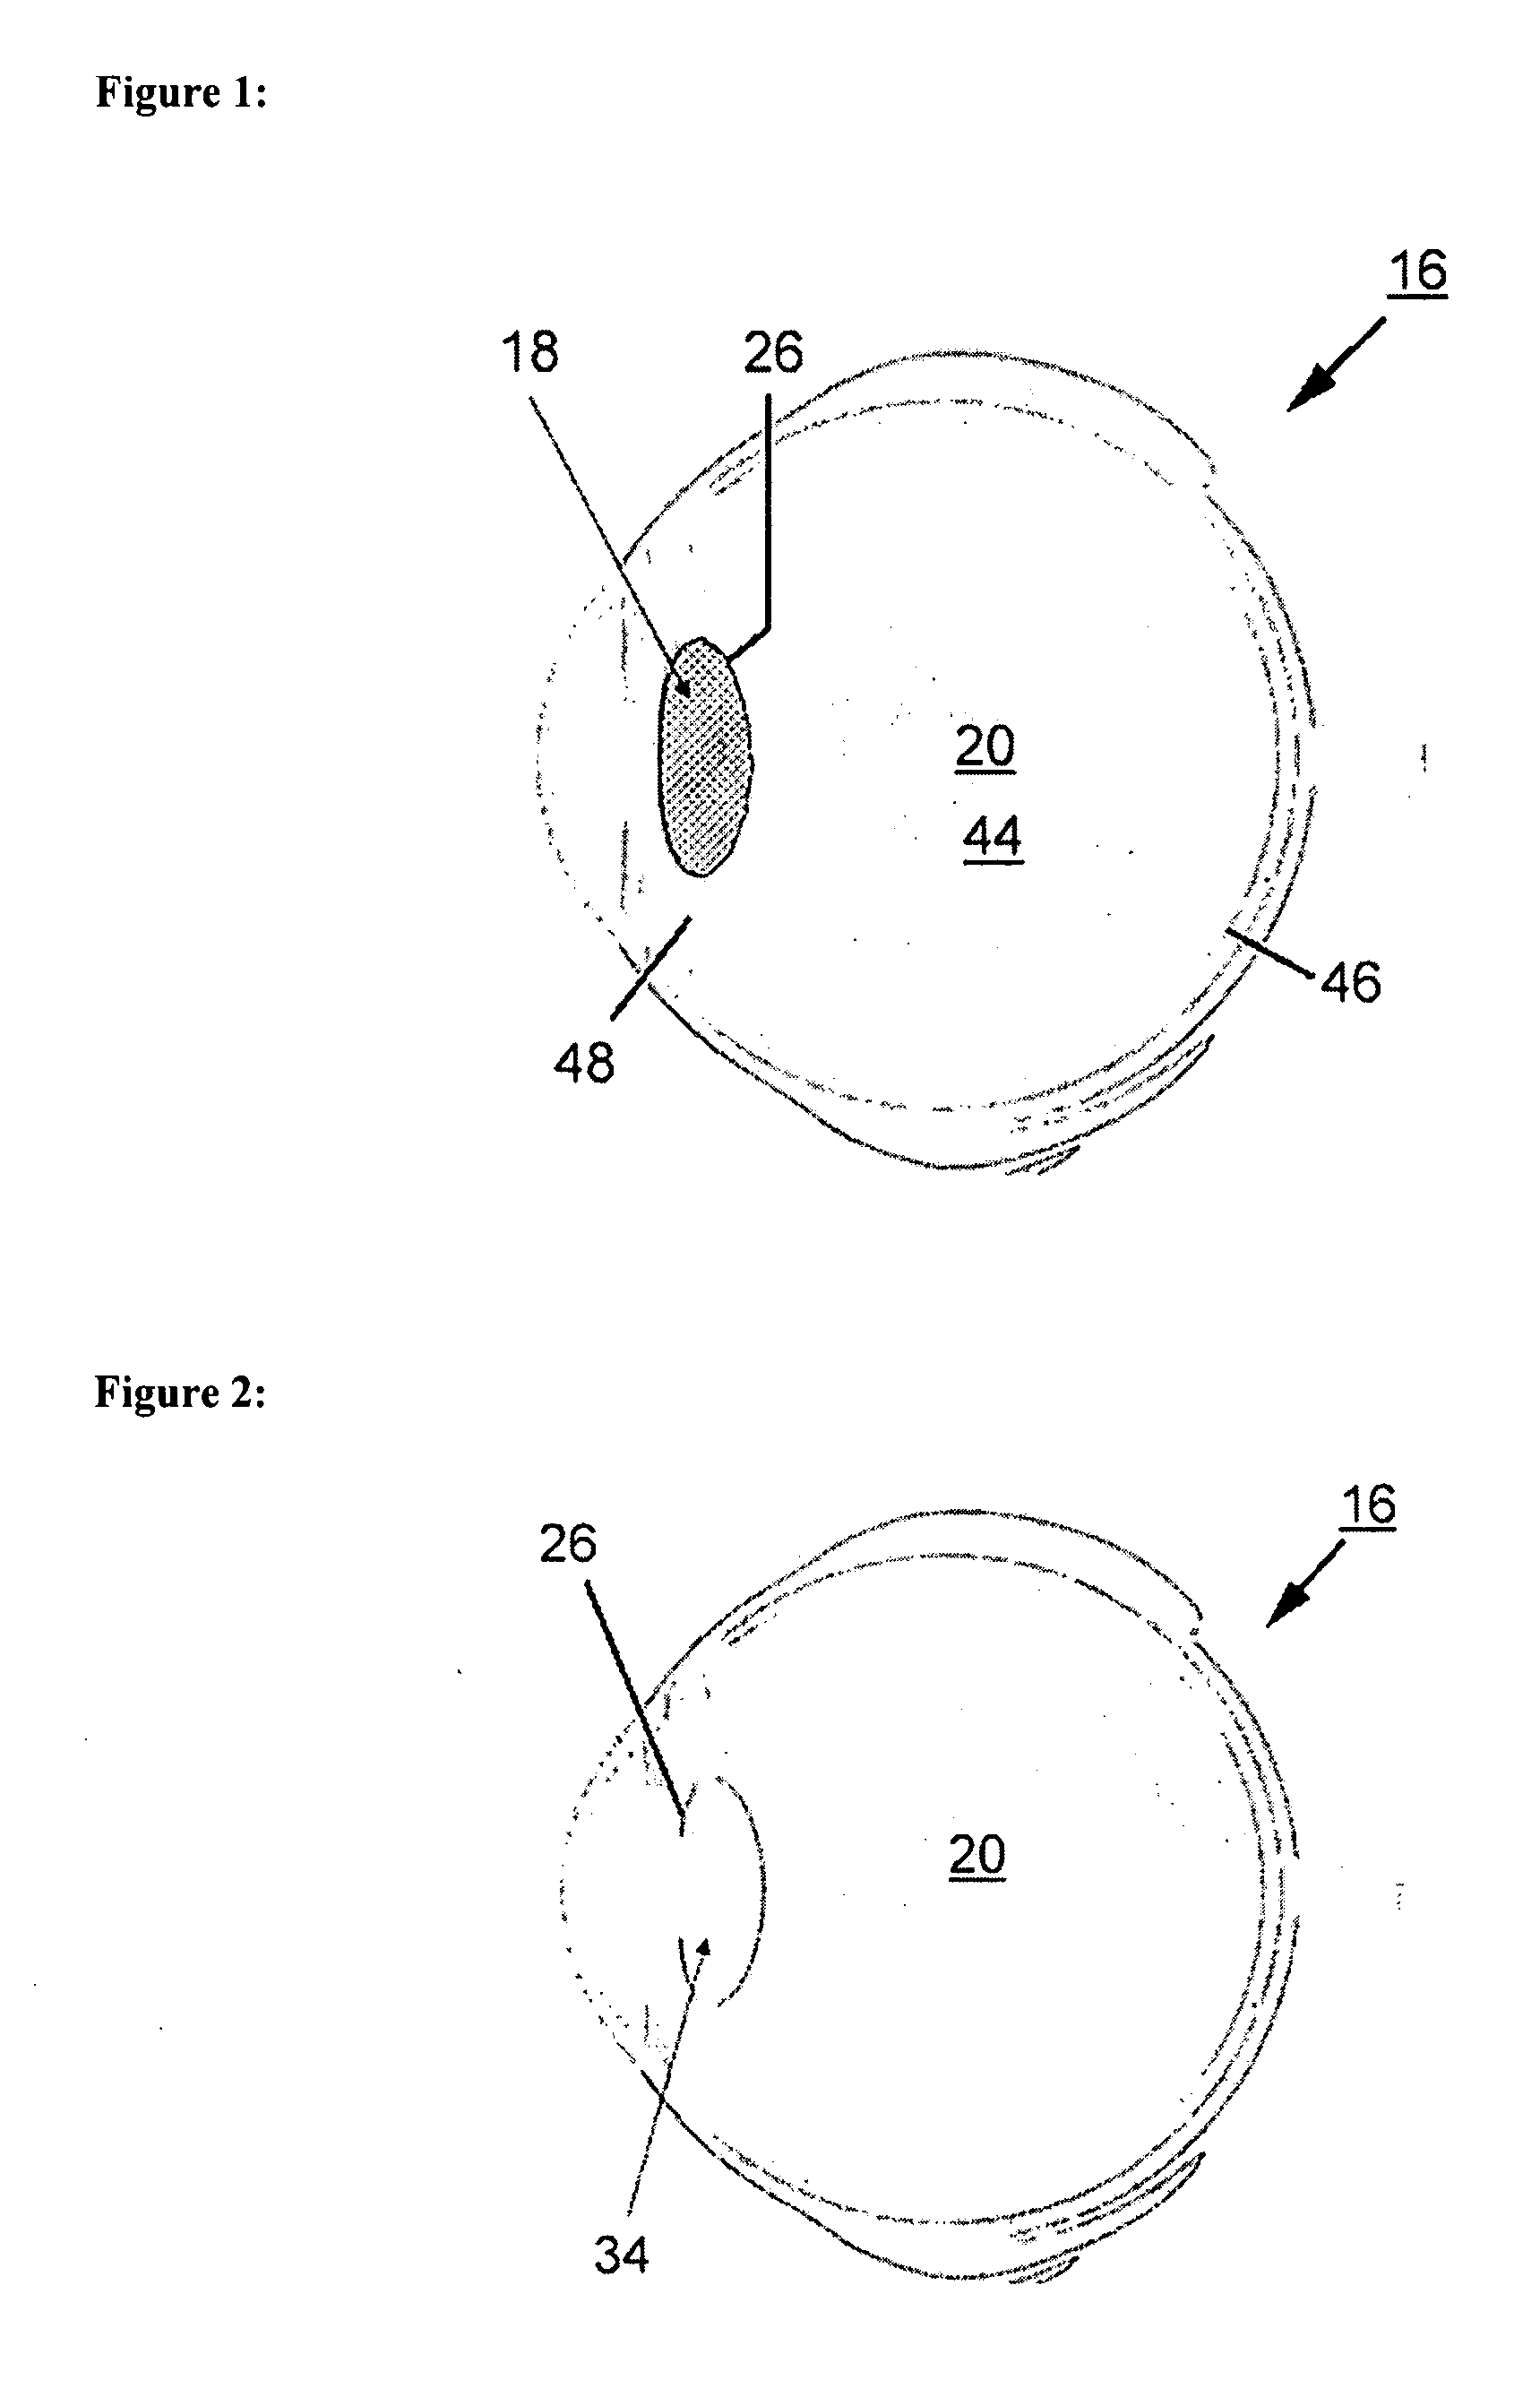 Eye implant and methods of positioning an artificial eye implant within the eye of a human or an animal